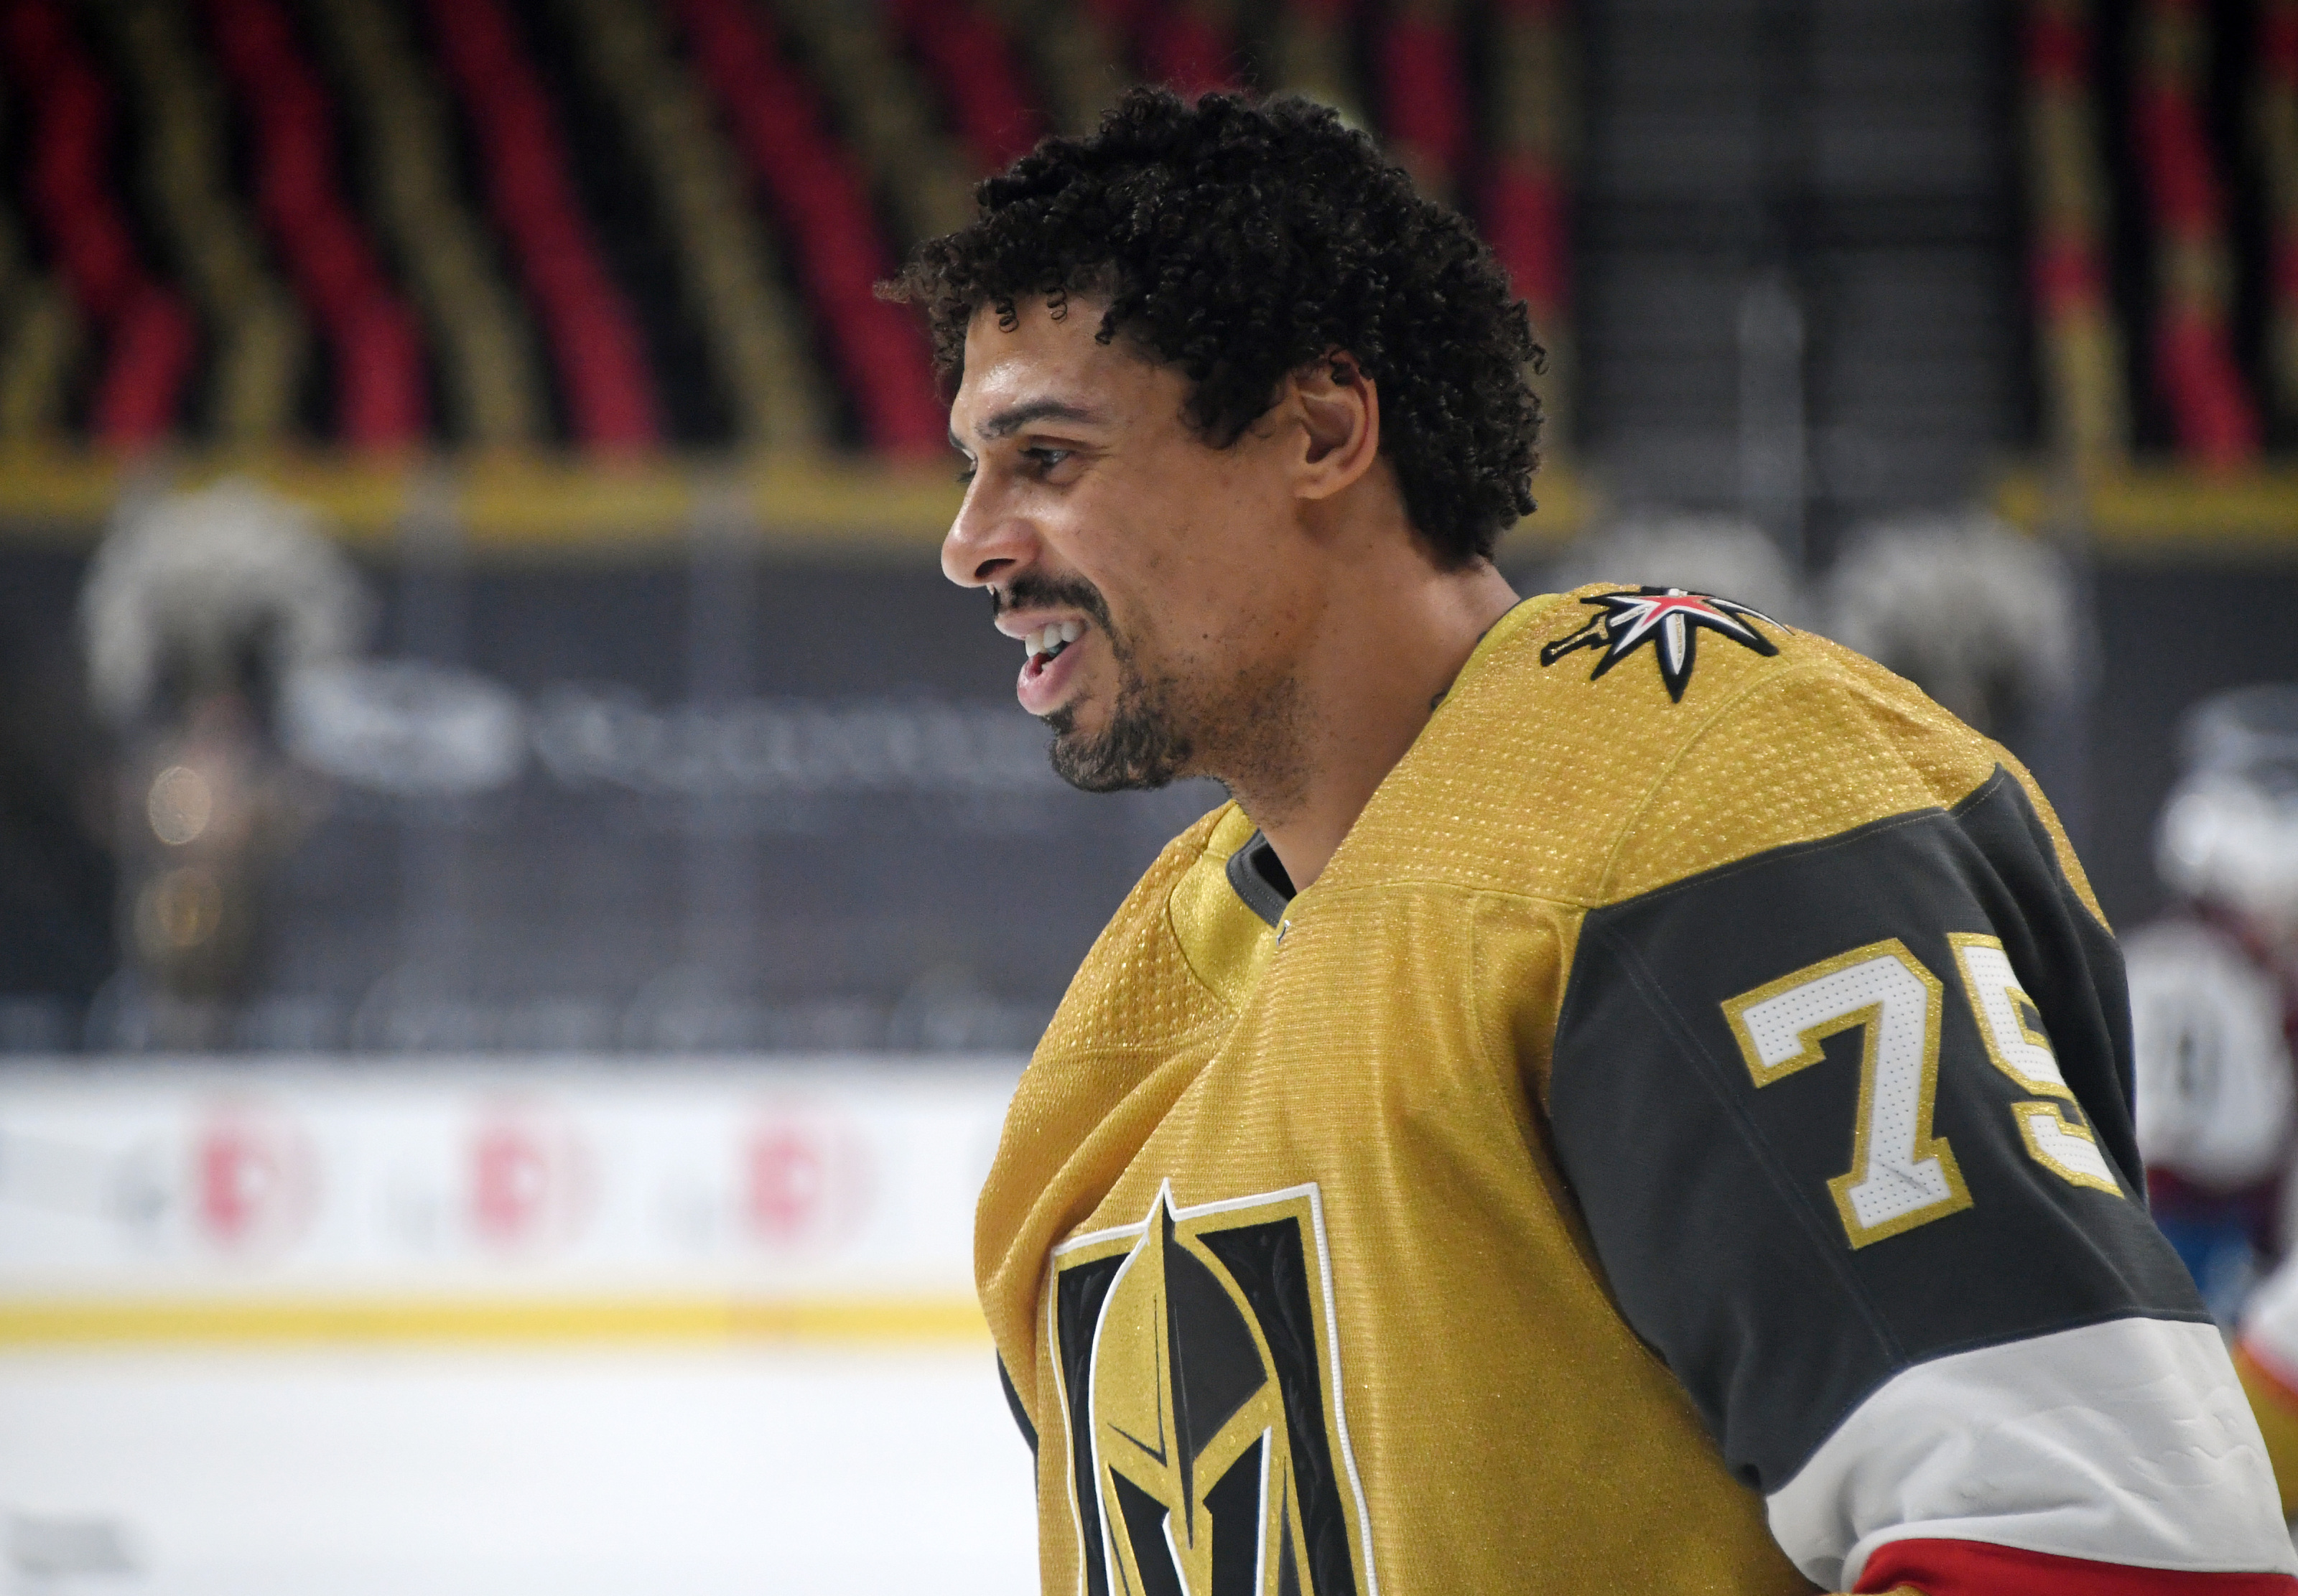 Vegas' Reaves suspended 2 games by NHL for hit vs. Avalanche